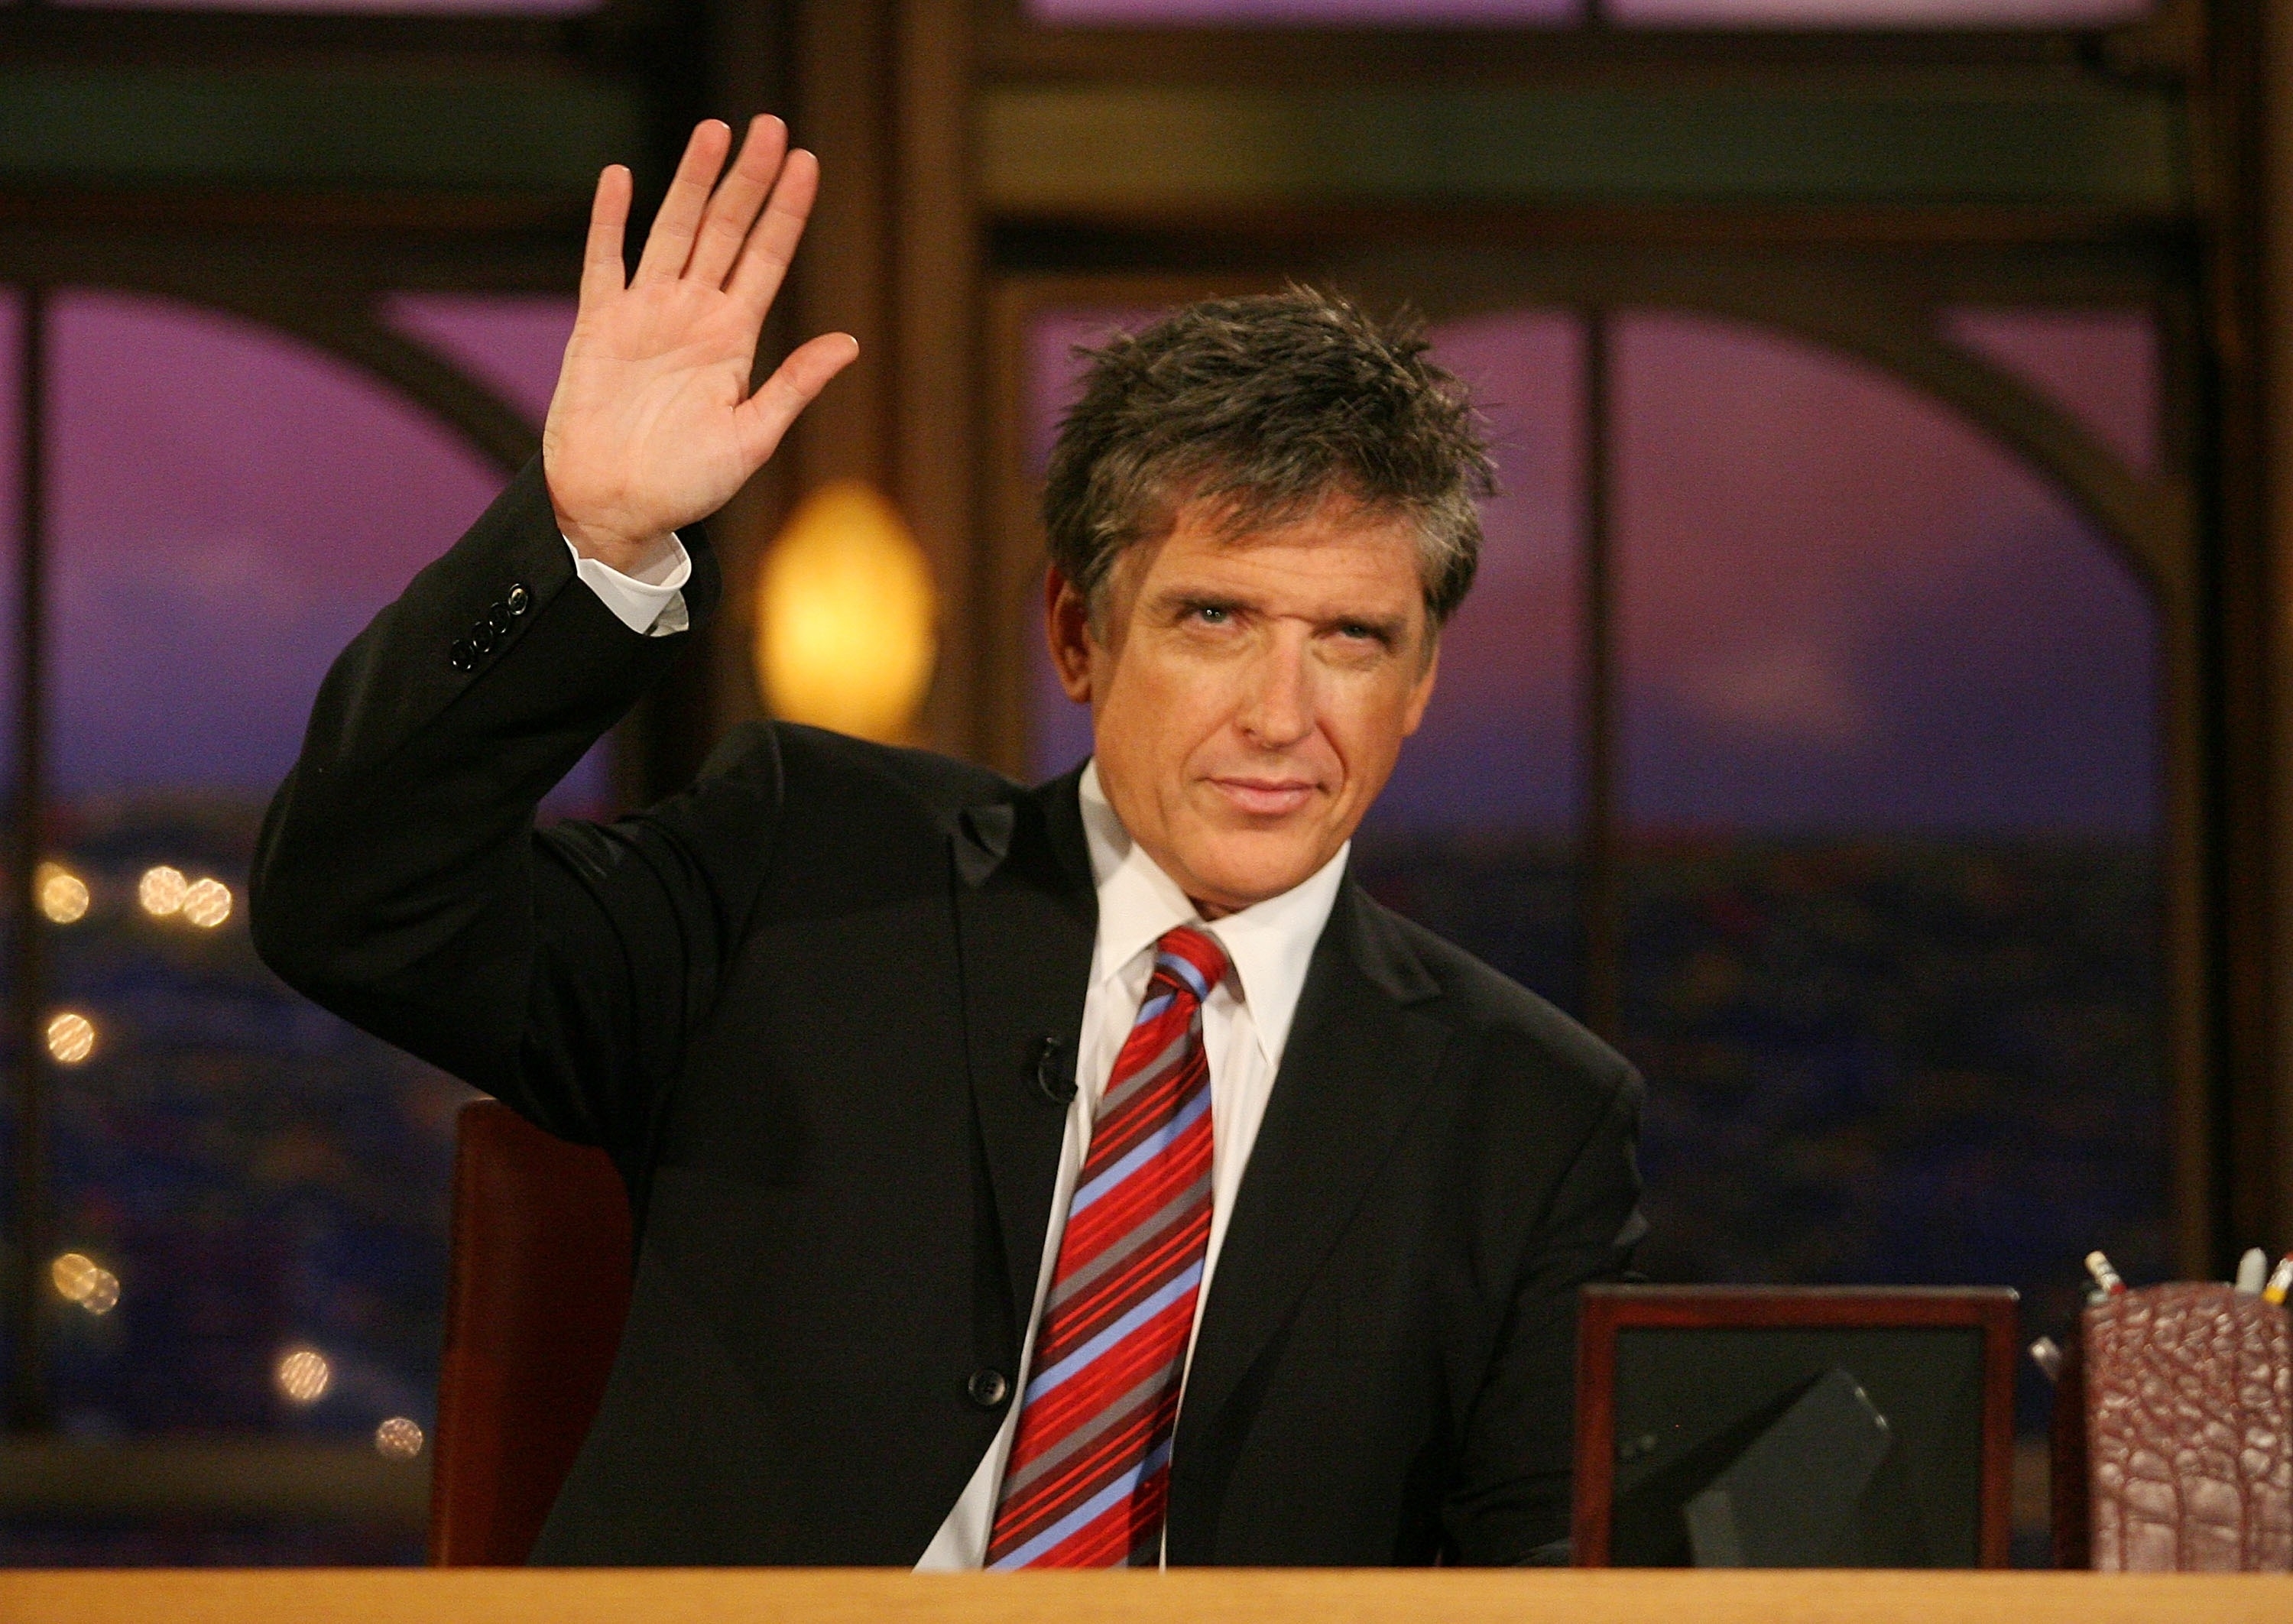 Close-up of Craig waving and wearing a suit and tie